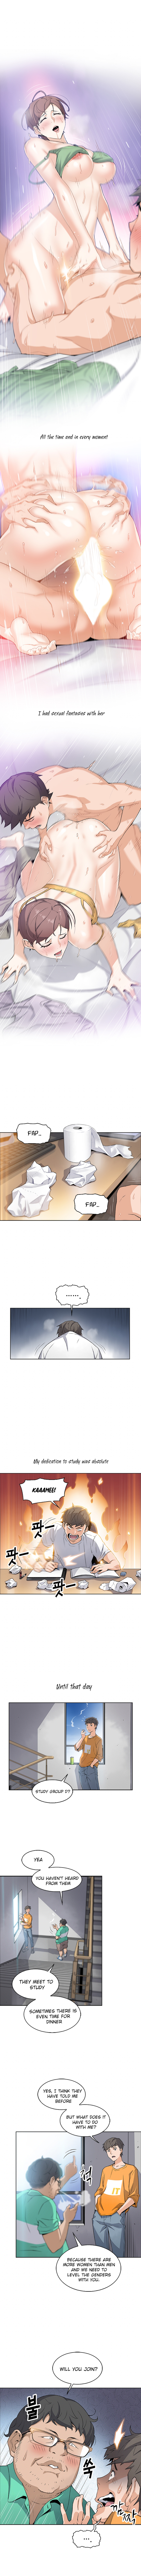 Housekeeper Manhwa - Chapter 1 Page 8